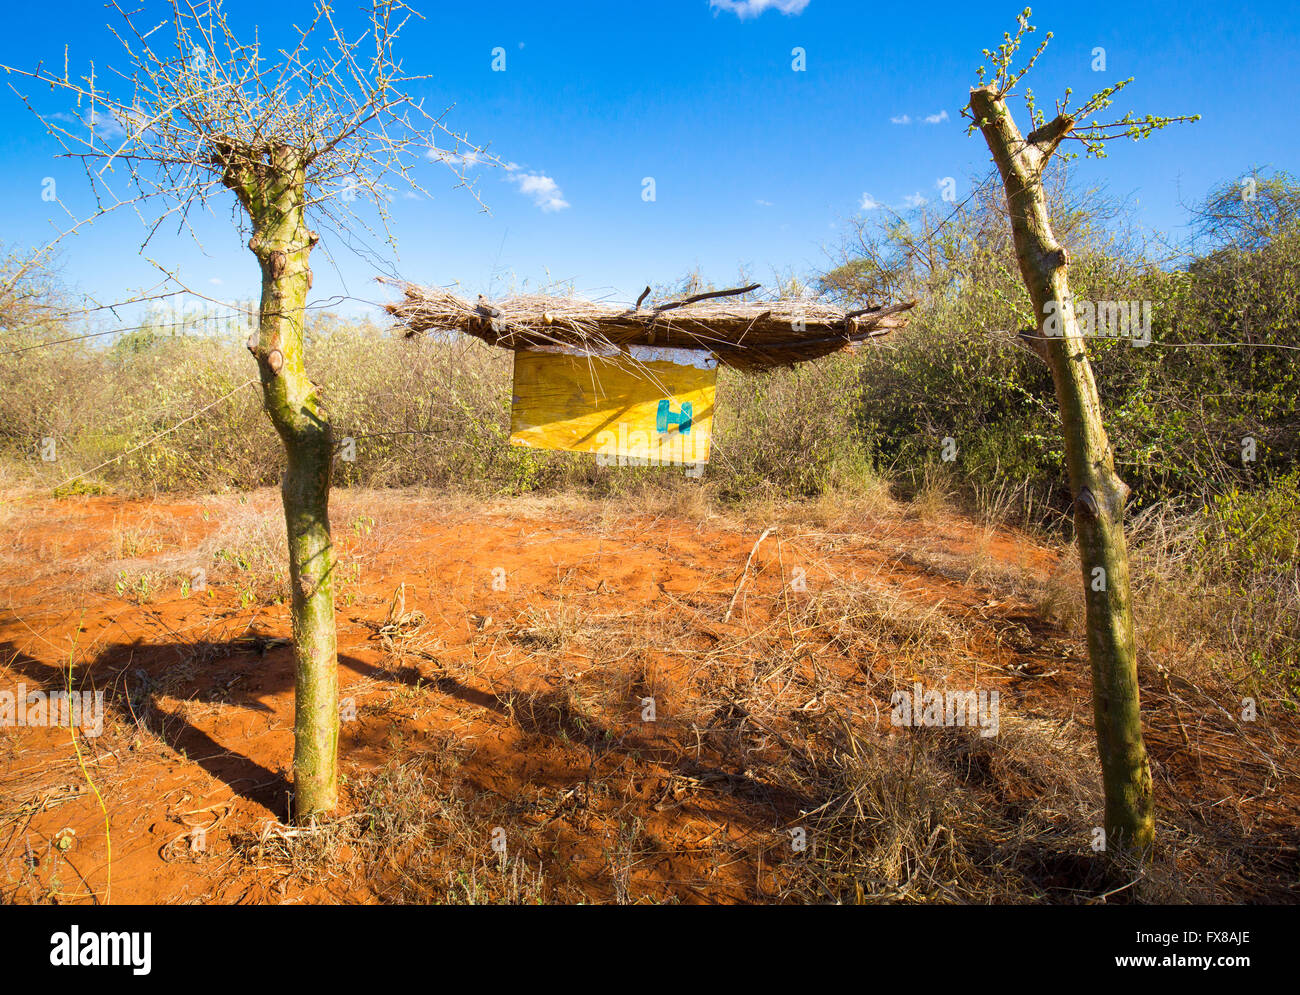 Beehive fence of African bee hives designed to deter elephants from raiding crops on a farm near near Voi in Southern Kenya Stock Photo